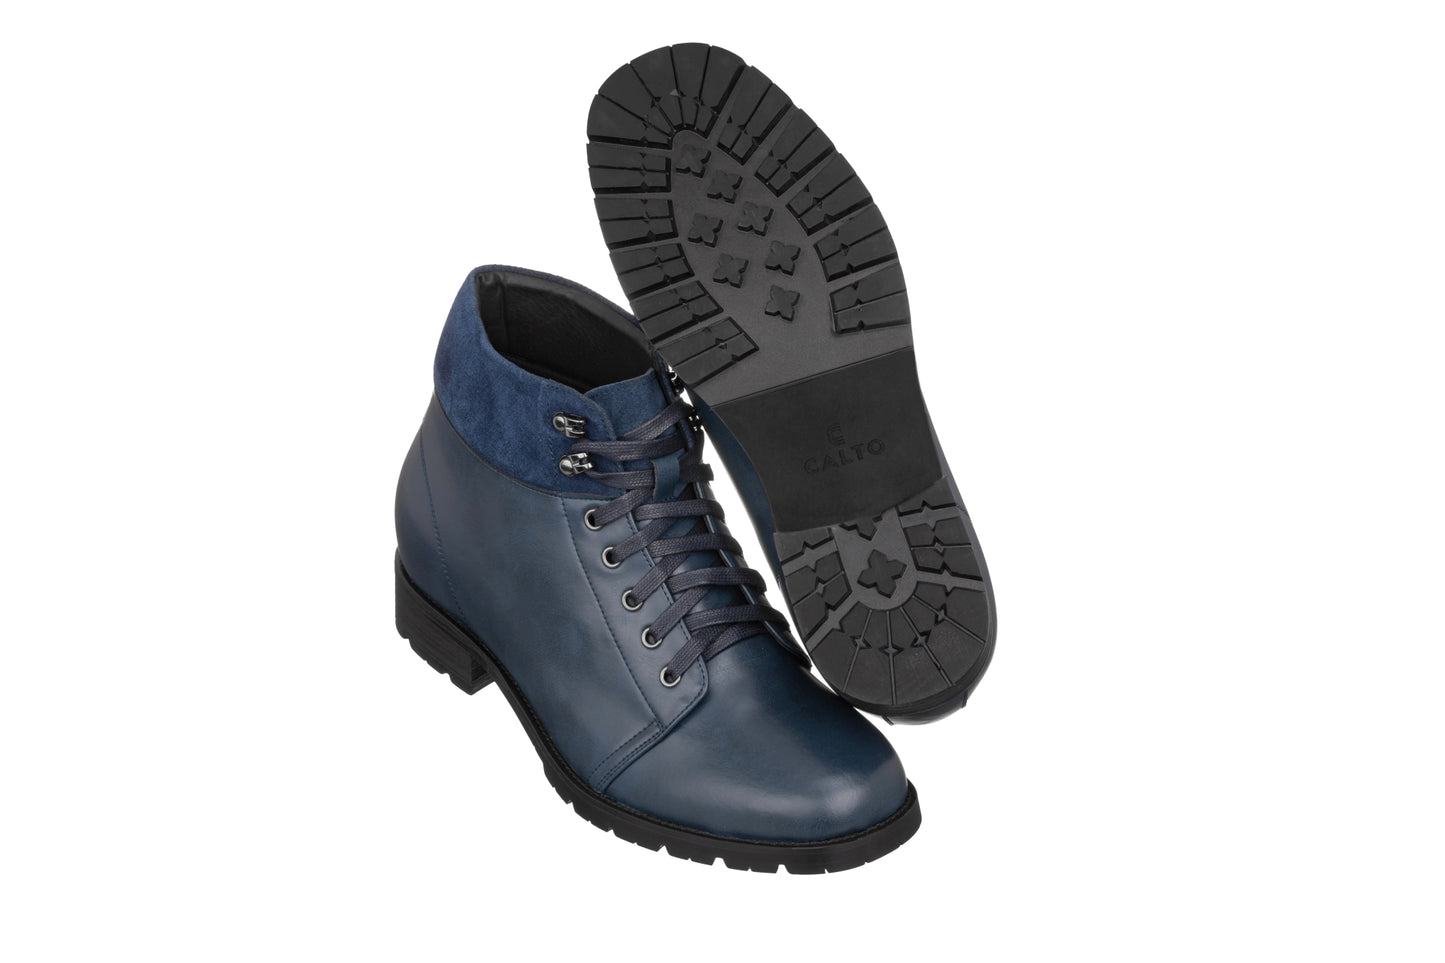 Elevator shoes height increase CALTO - K9362 - 3.3 Inches Taller (Slate Blue)